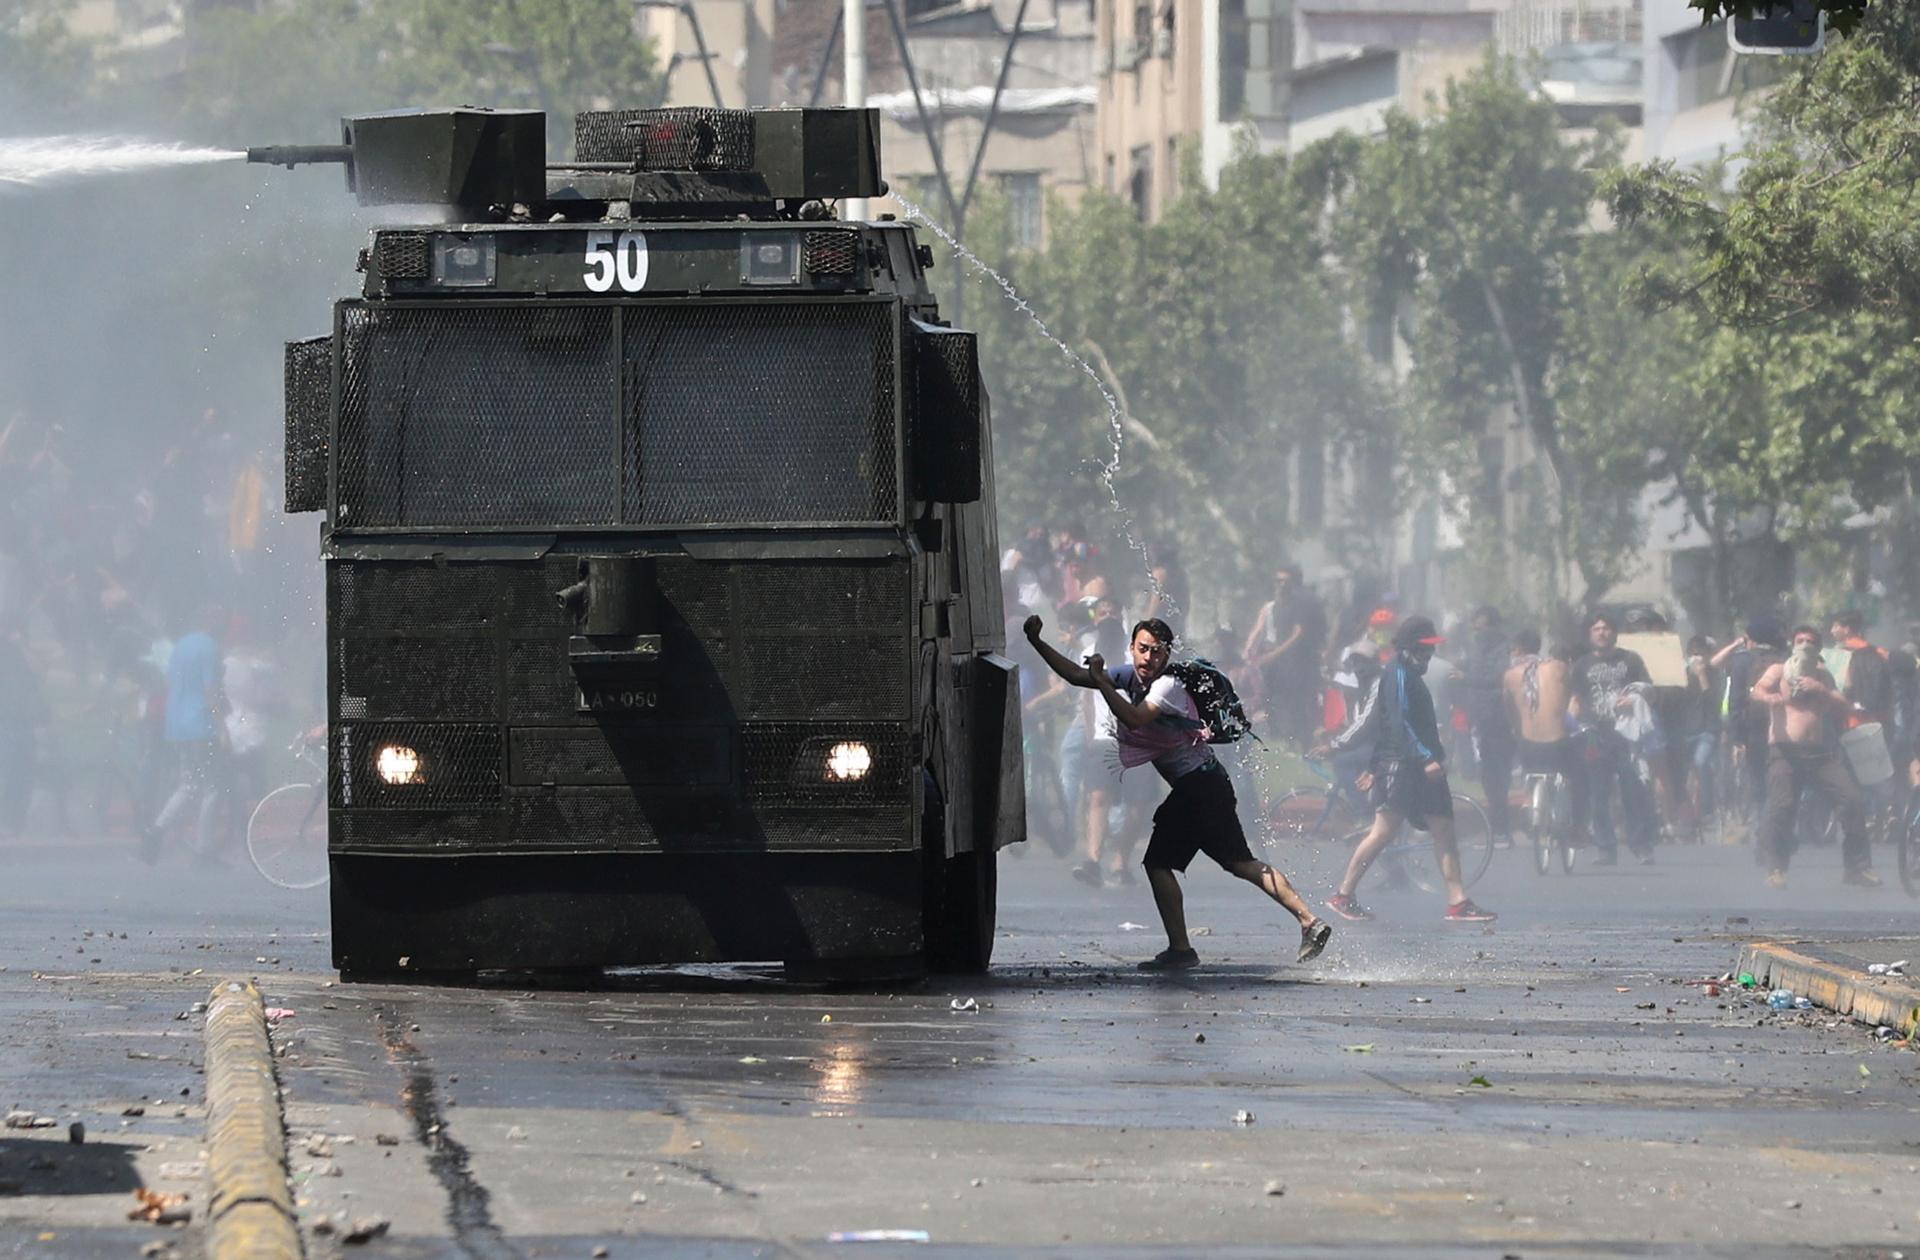 A man is shown wearing shorts and a t-shirt while getting sprayed by a police water cannon from above.